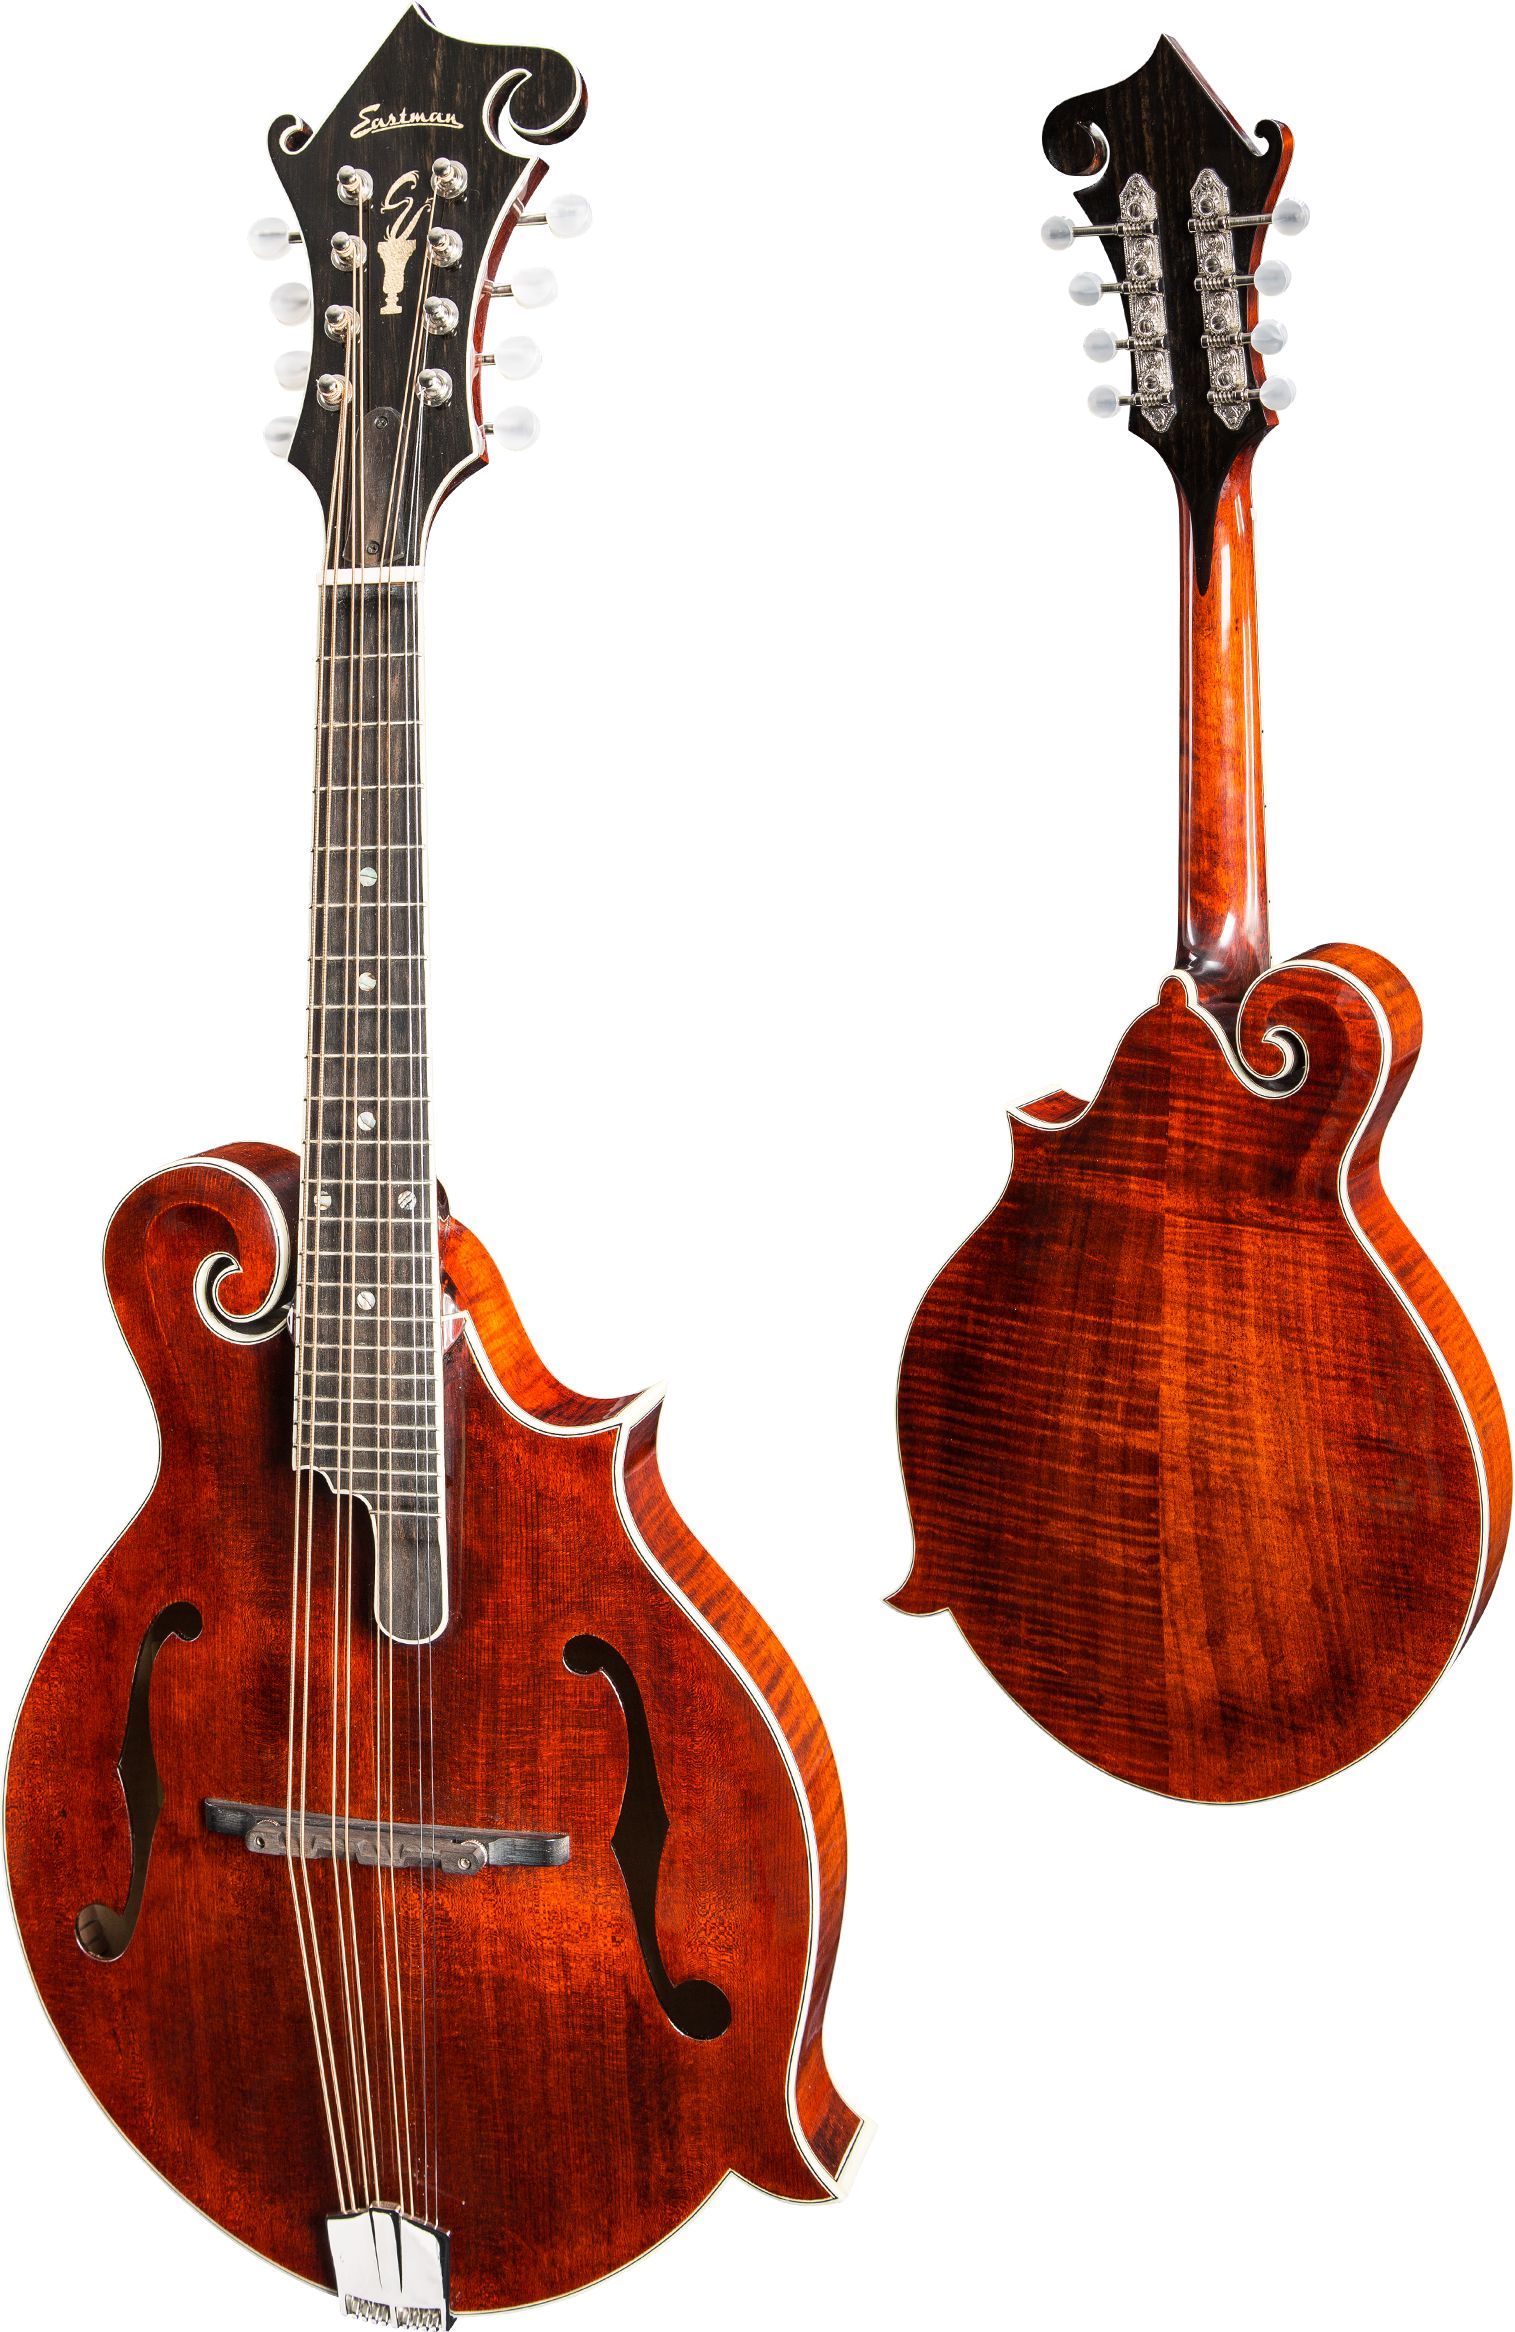 Eastman MDA815 F-style Mandola Mandolin (Solid Spruce top, Solid AAA Maple back & Sides, w/Case), Mandolin for sale at Richards Guitars.